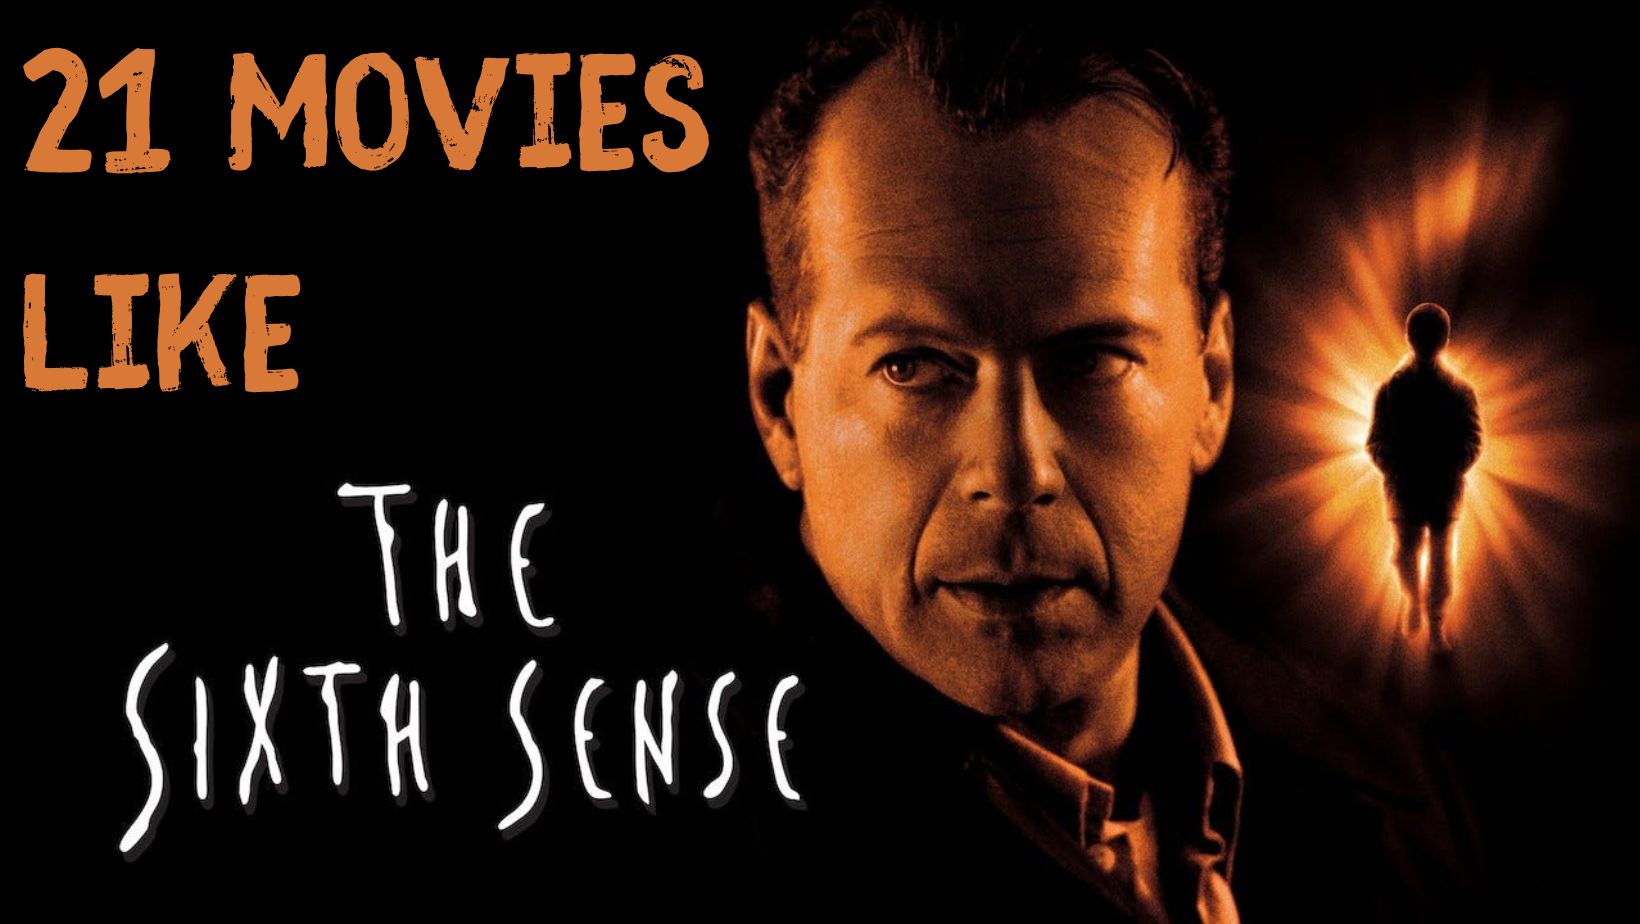 Like This Watch That: 21 Supernatural Thriller Movies Like The Sixth Sense